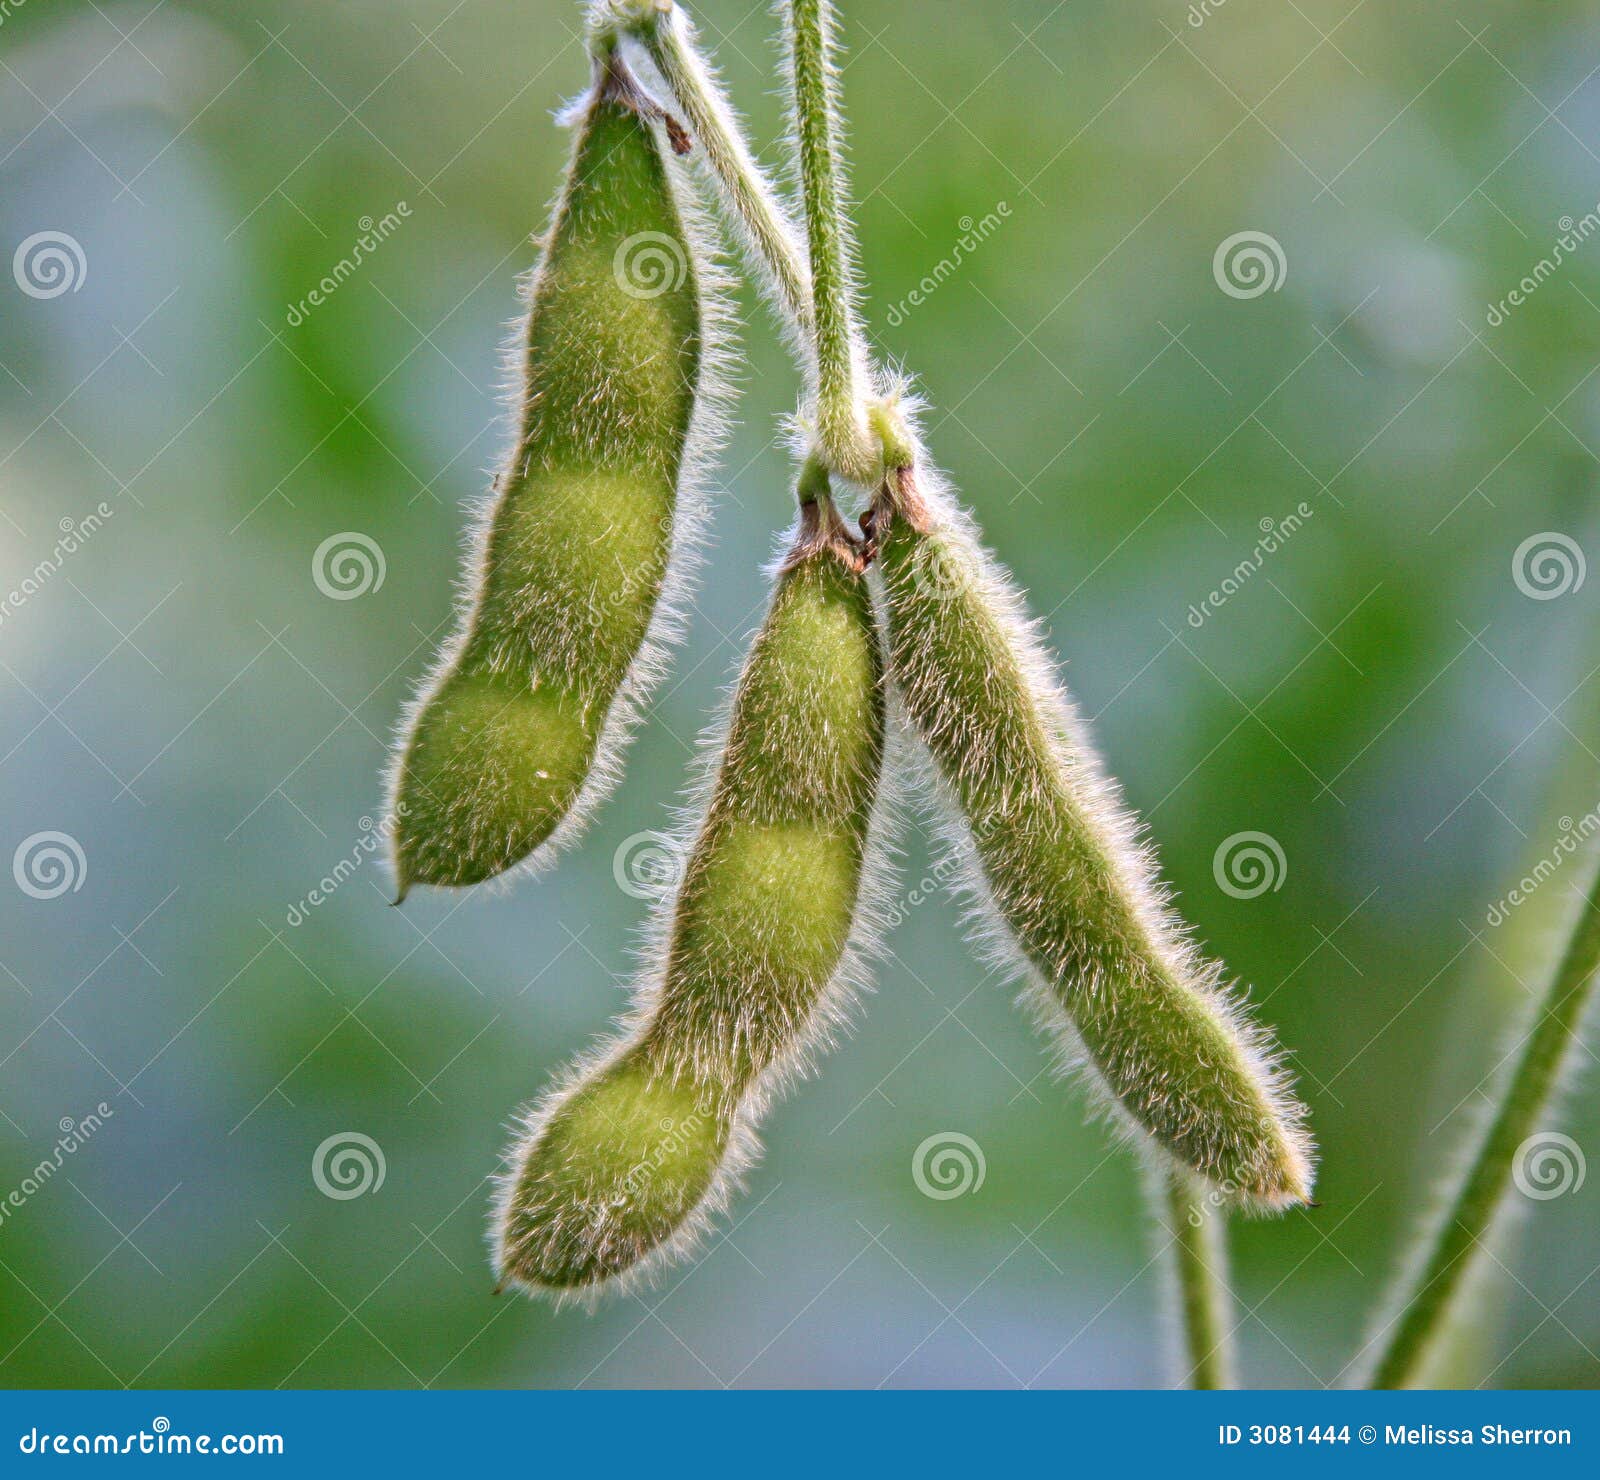 soy bean pods